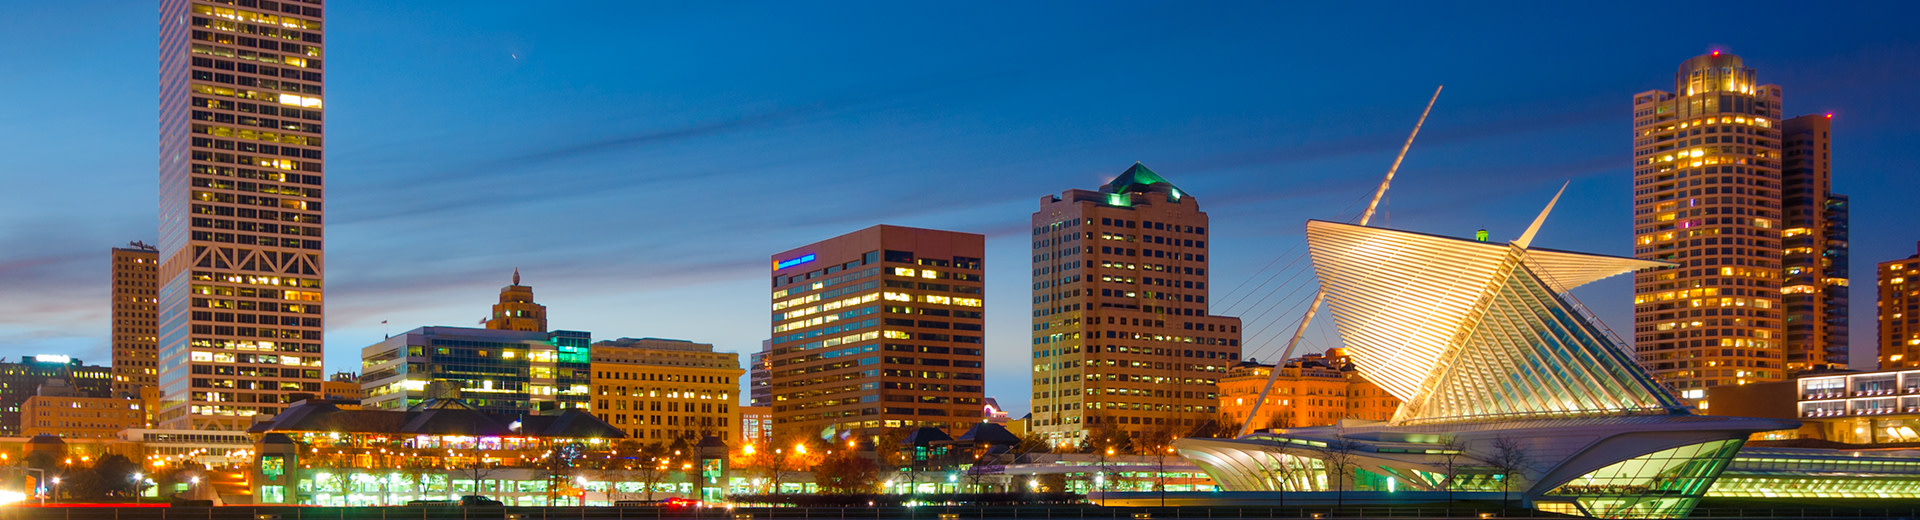 The skyline of Milwaukee, mainly office buildings, at night.